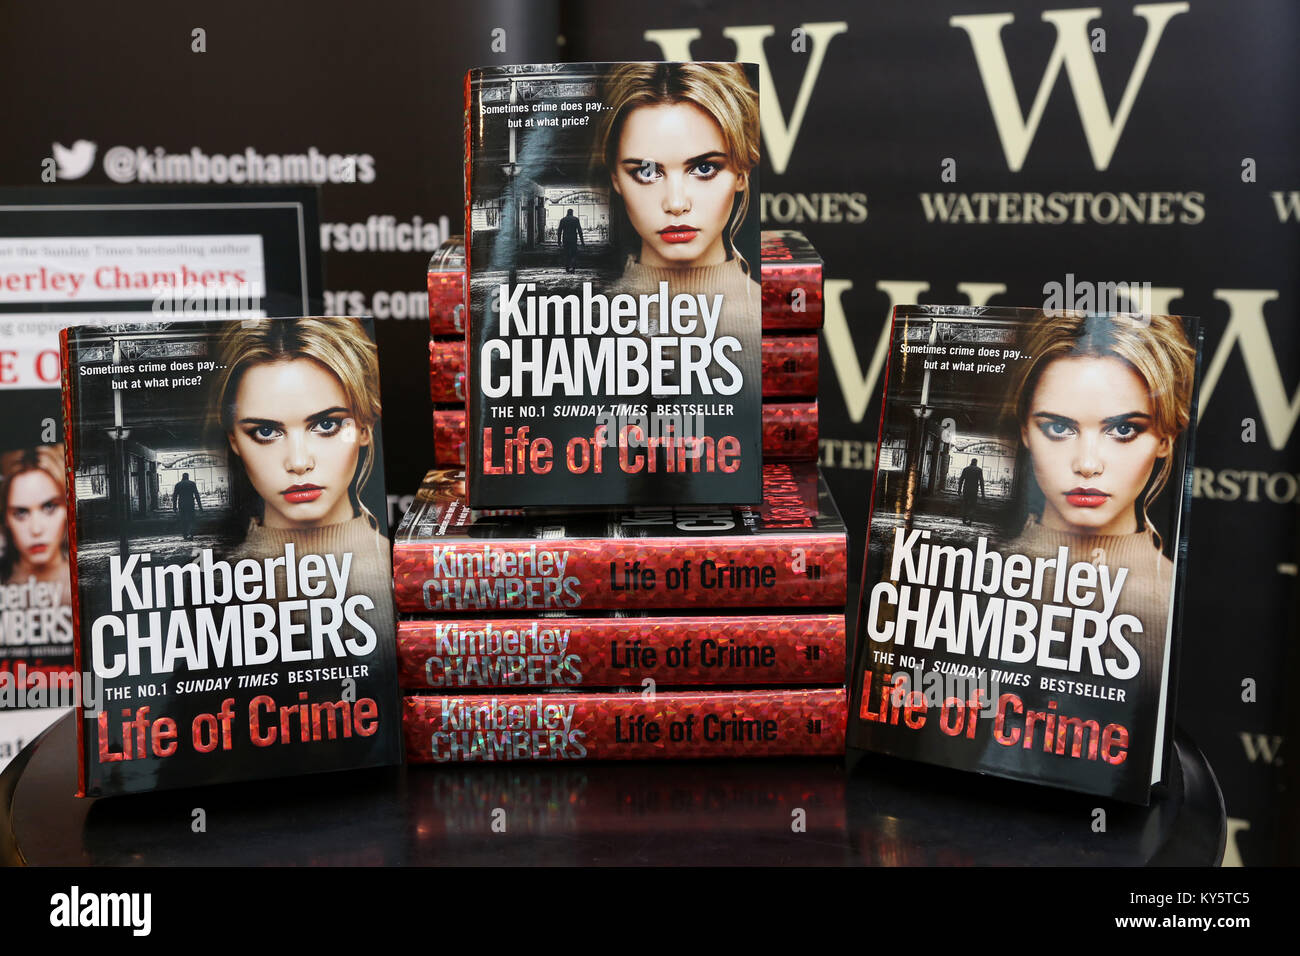 Romford Essex, UK. 13th Jan, 2018. Crime author Kimberley Chambers signs copies of her 13th and latest book Life of Crime at Waterstones bookshop Romford Essex photo Credit: SANDRA ROWSE/Alamy Live News Stock Photo